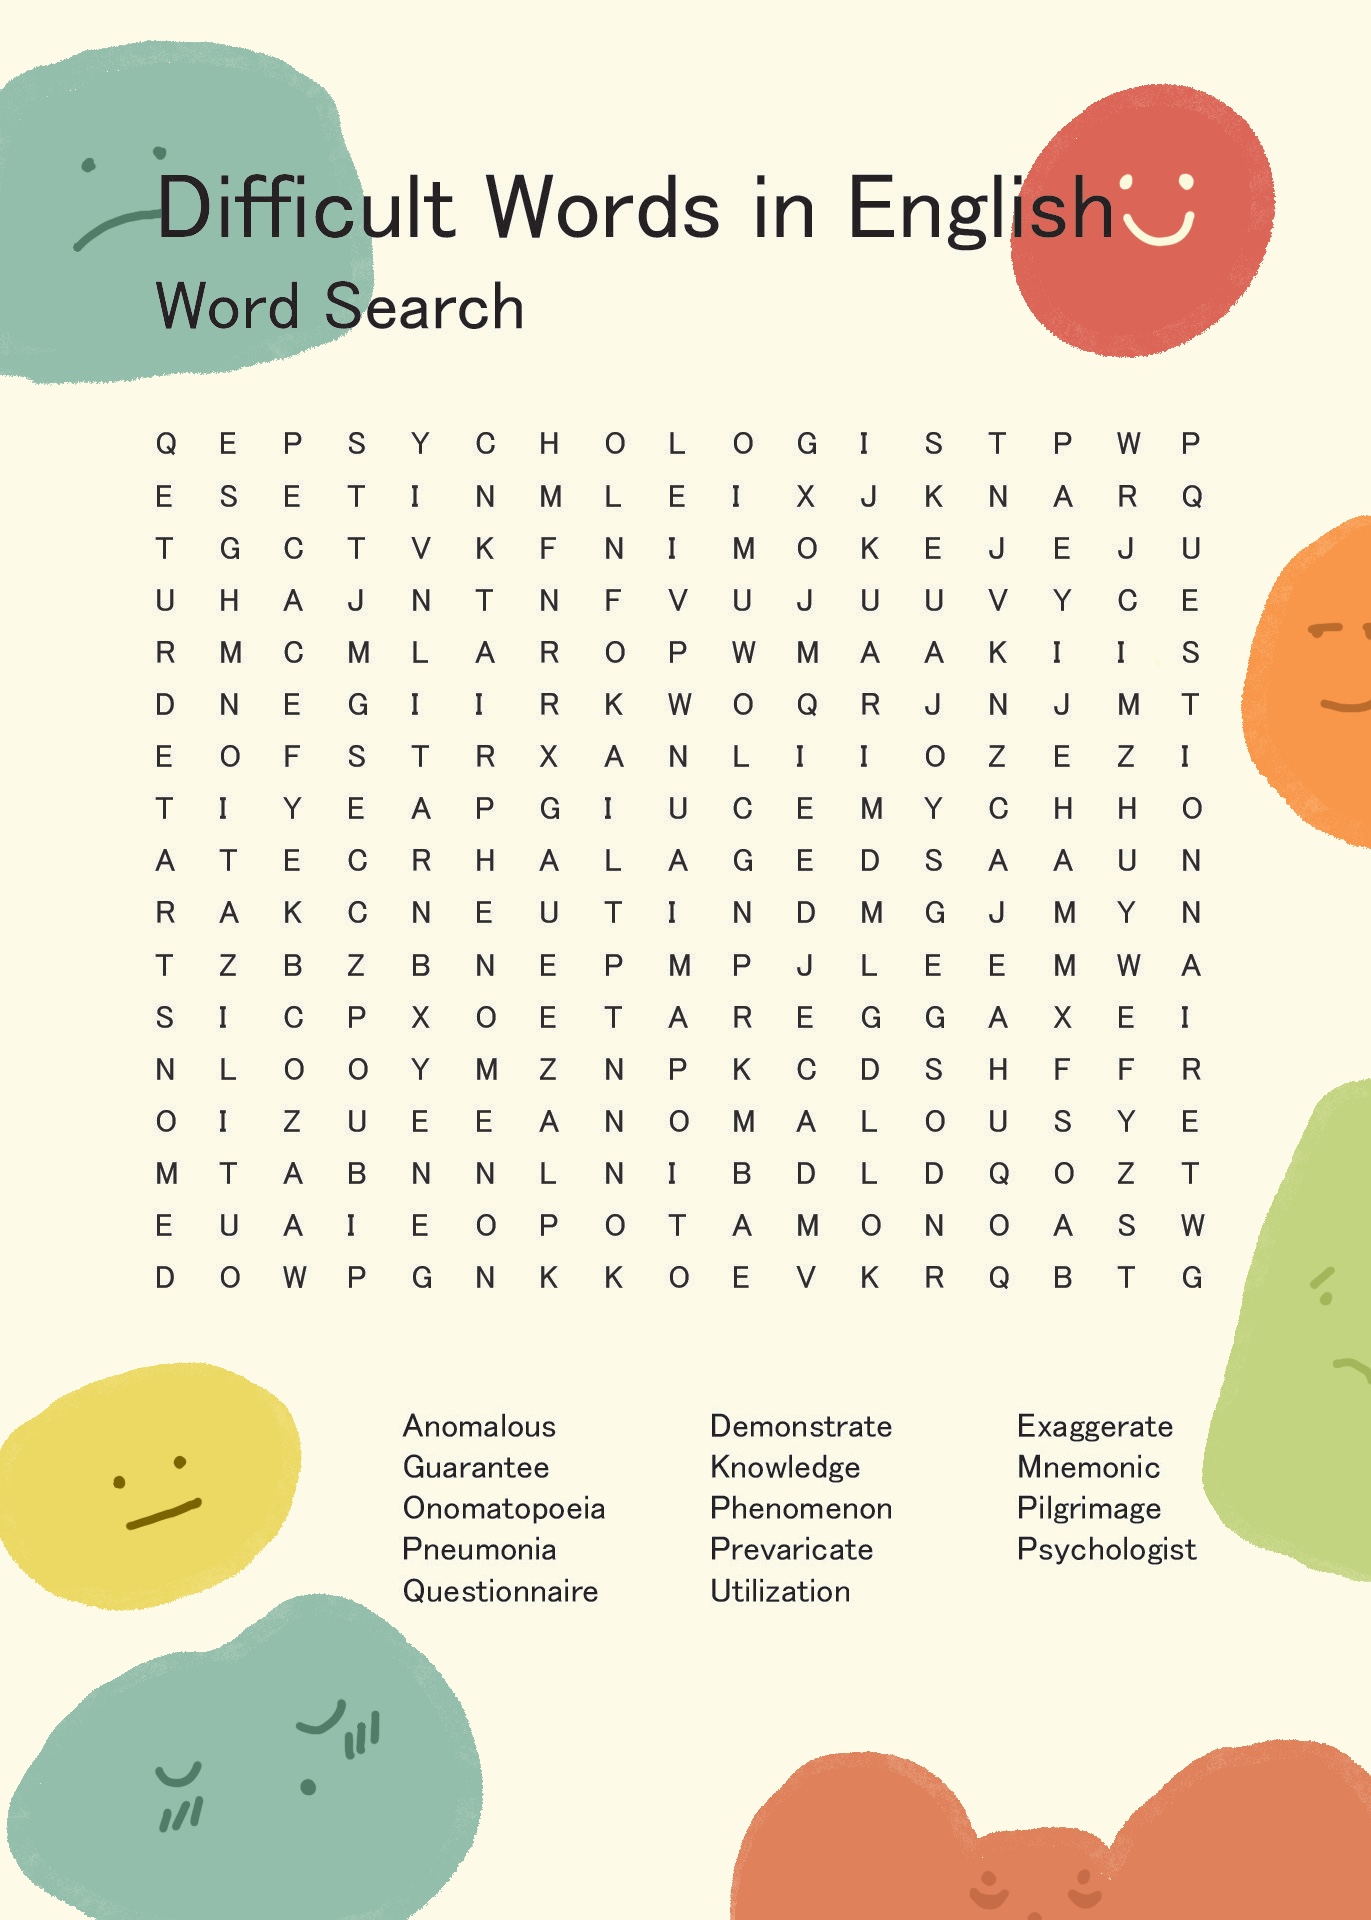 Printable Bible Word Search Puzzles for Kids